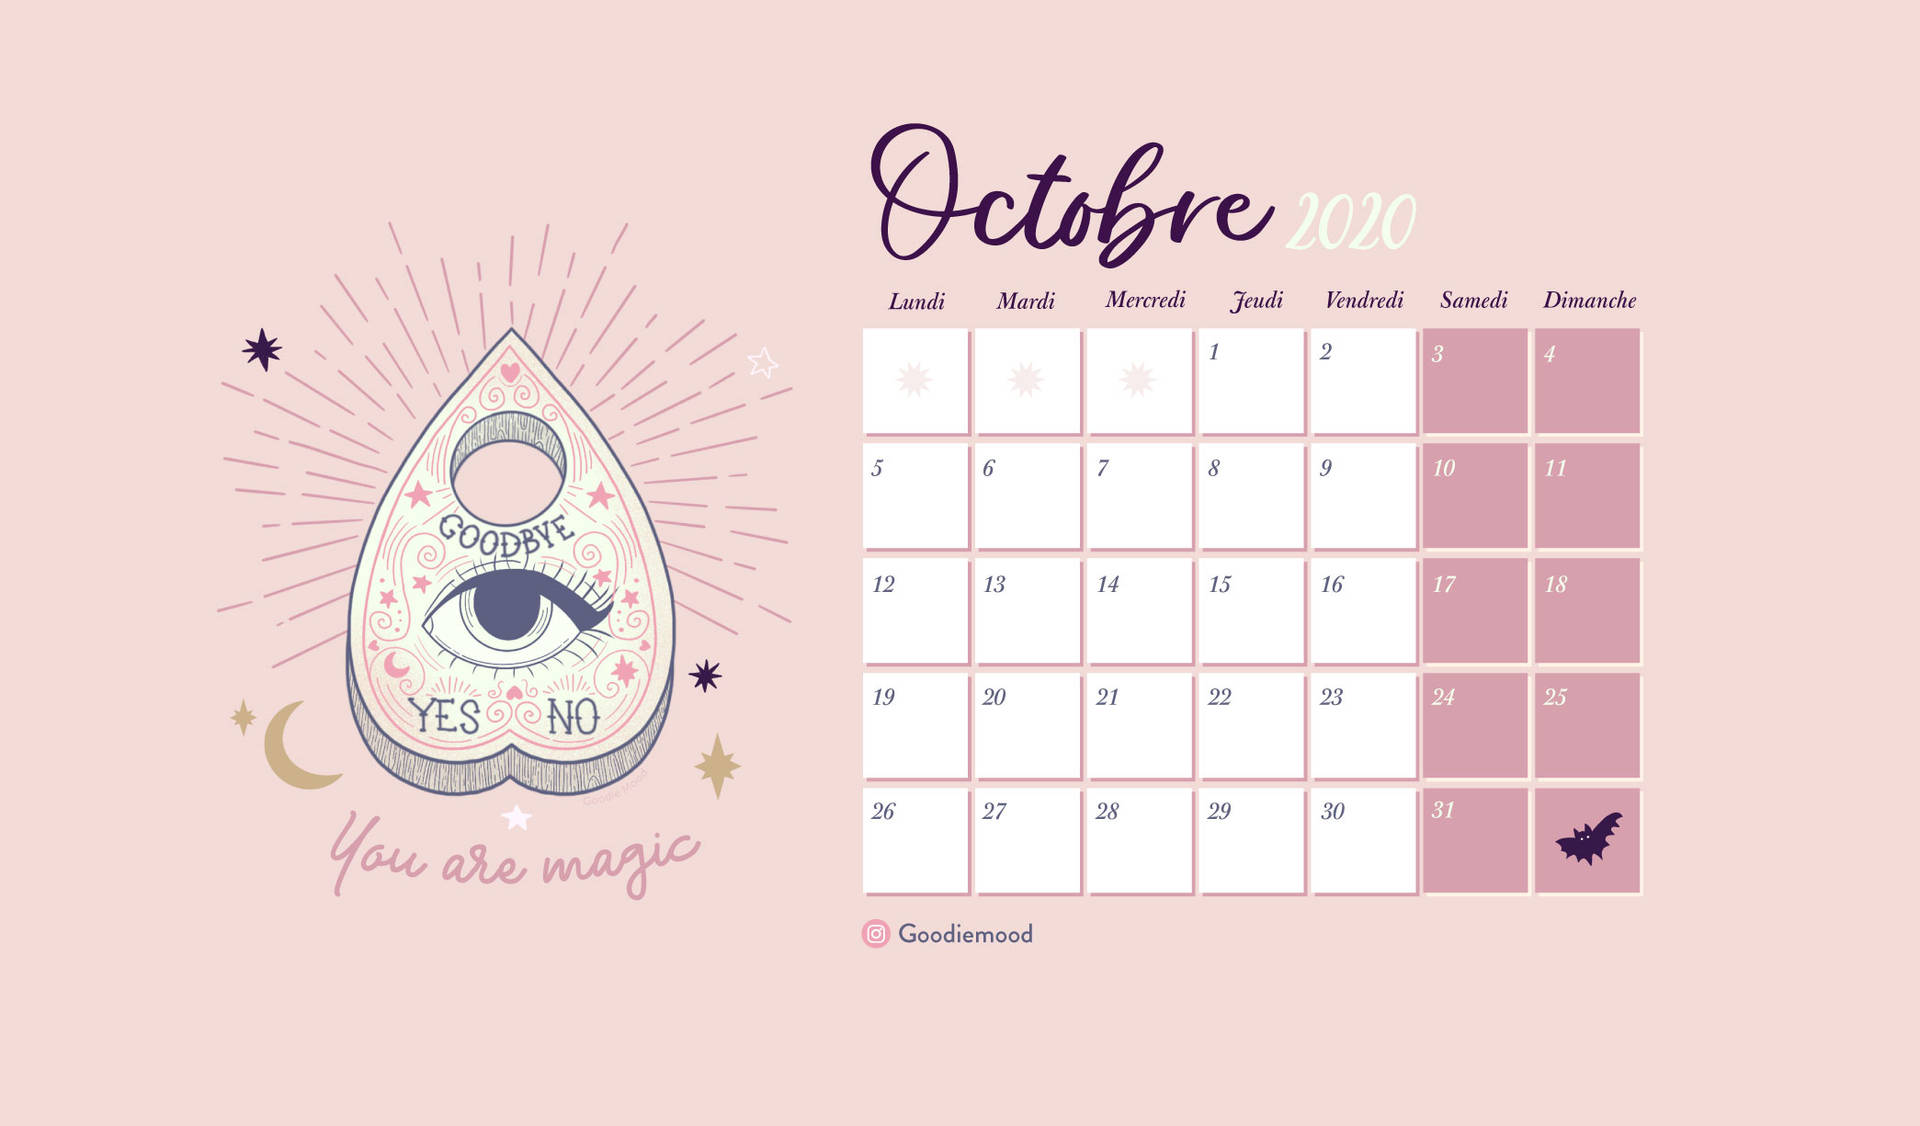 October 2019 Calendar With A Pink And Purple Design Wallpaper